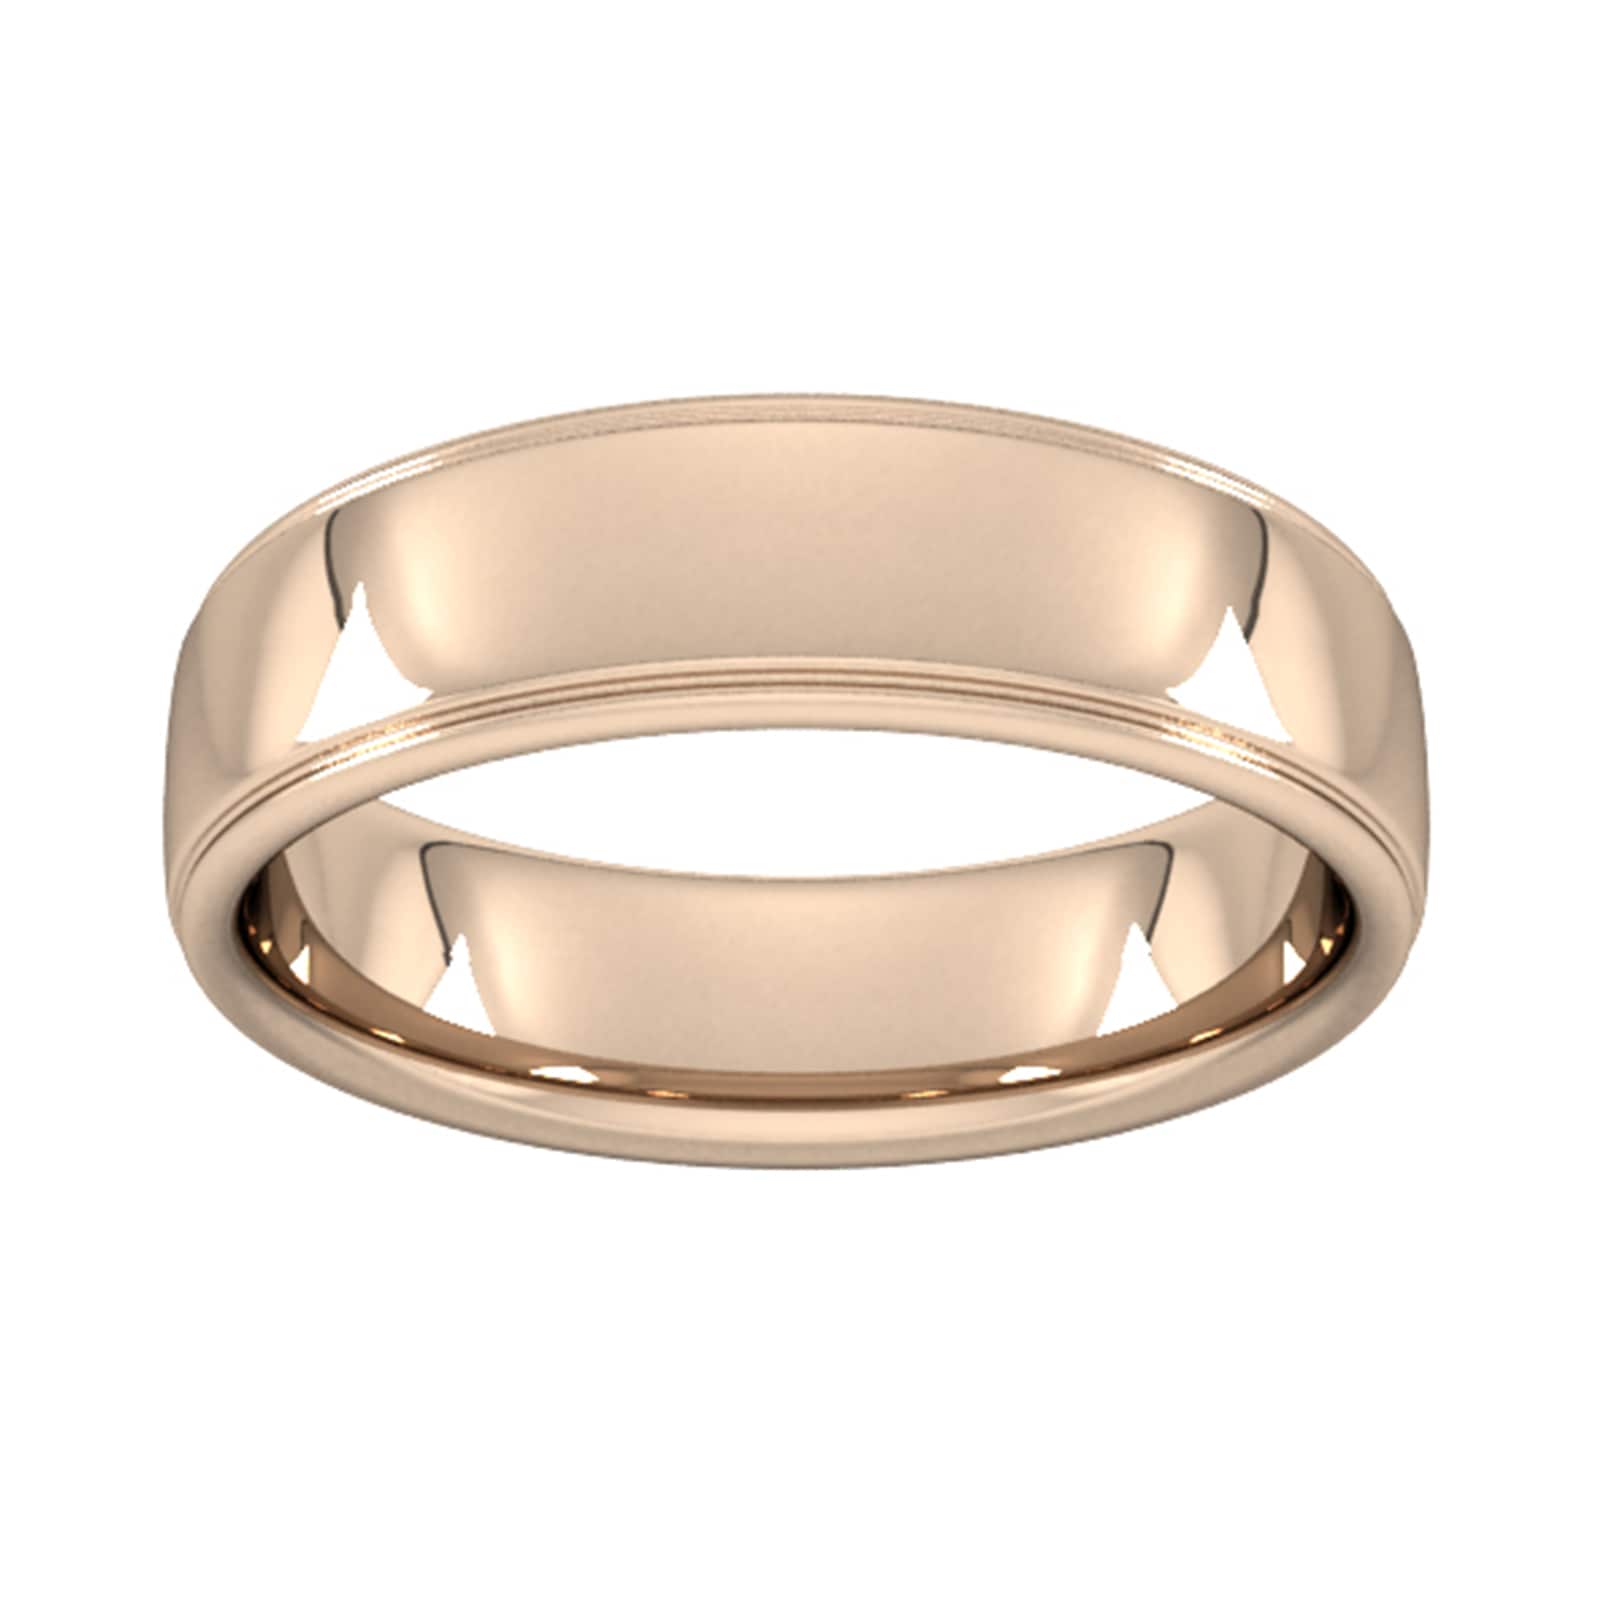 6mm Slight Court Standard Polished Finish With Grooves Wedding Ring In 18 Carat Rose Gold - Ring Size X